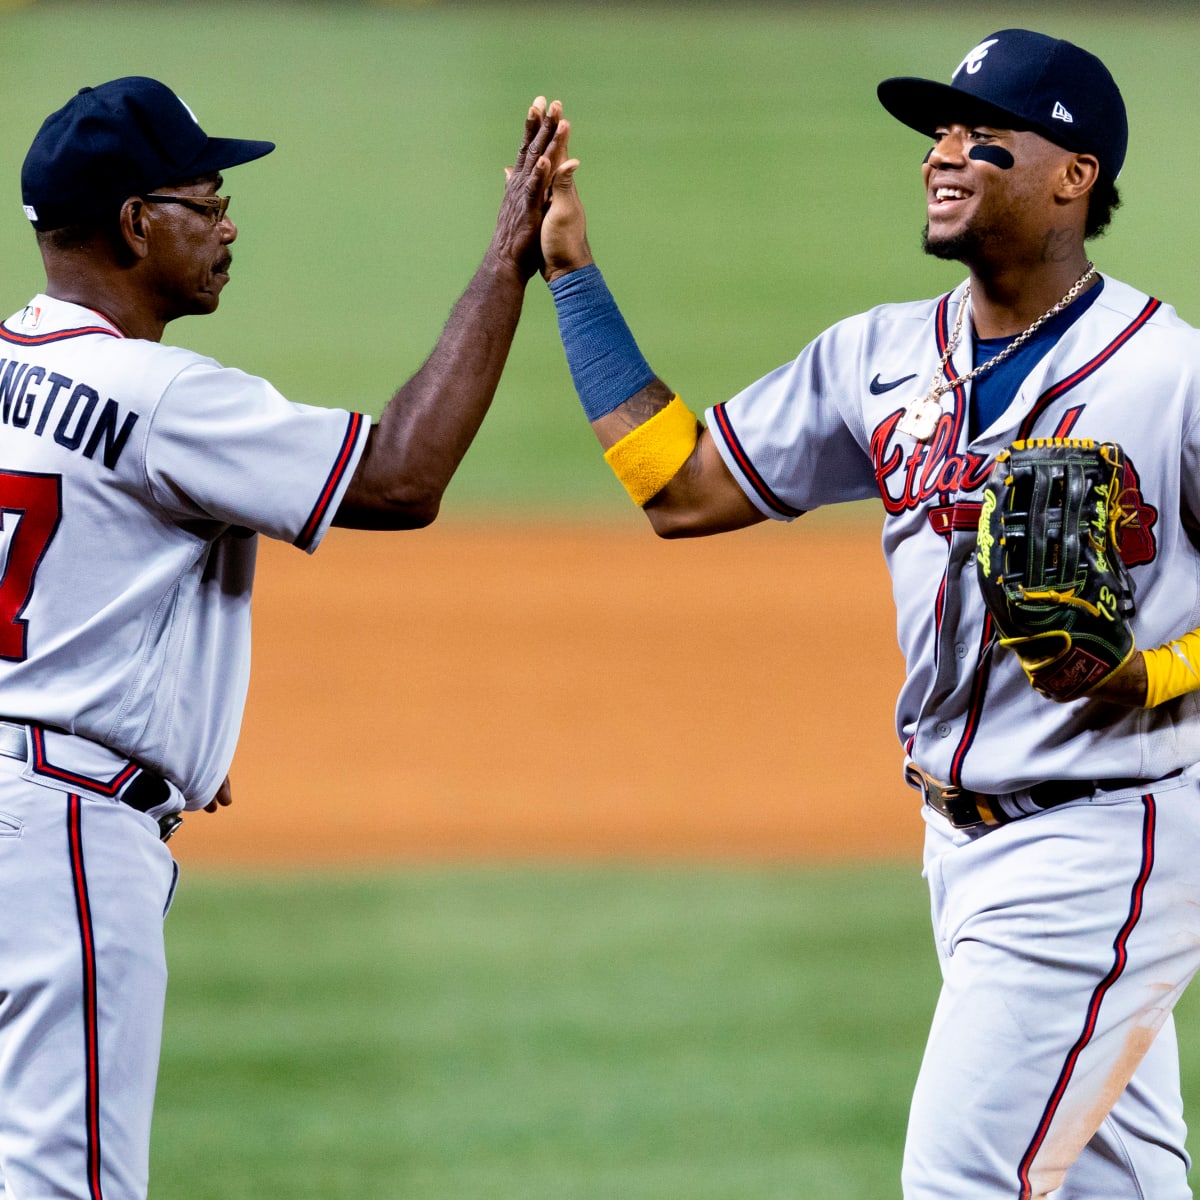 Ozzie Albies injury isn't Braves biggest concern heading into the playoffs